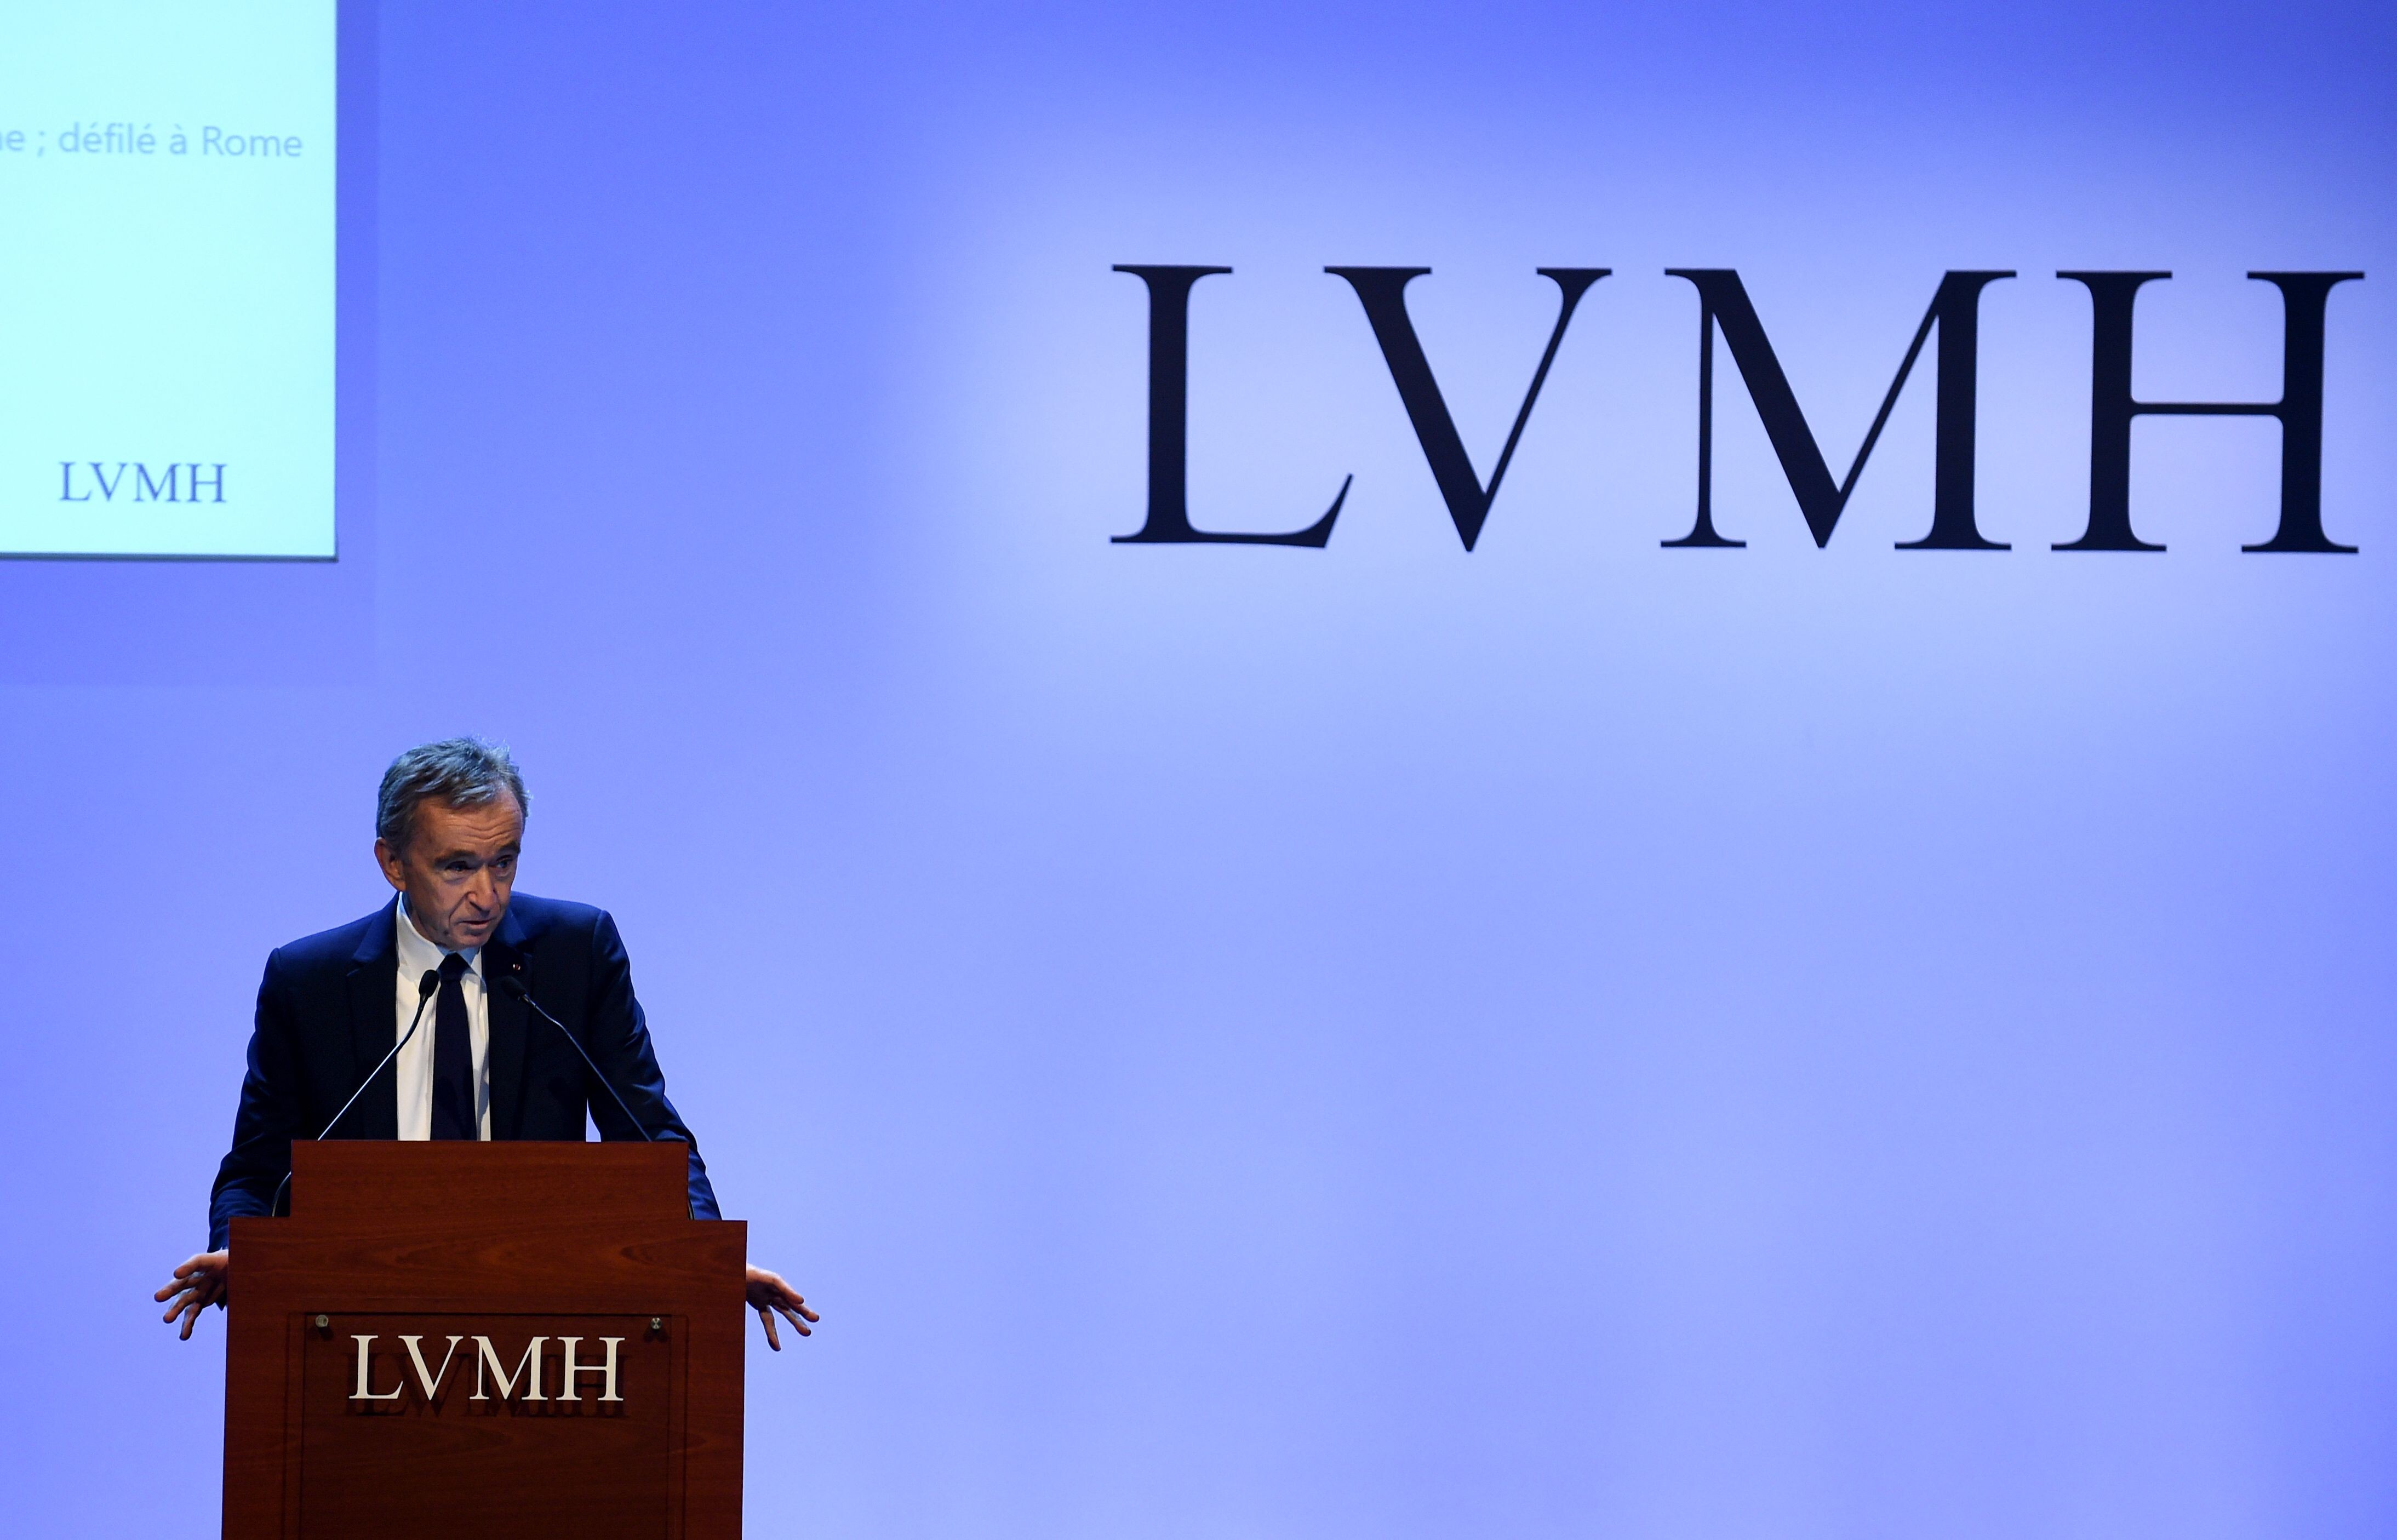 Could LVMH be considering a Richemont takeover?